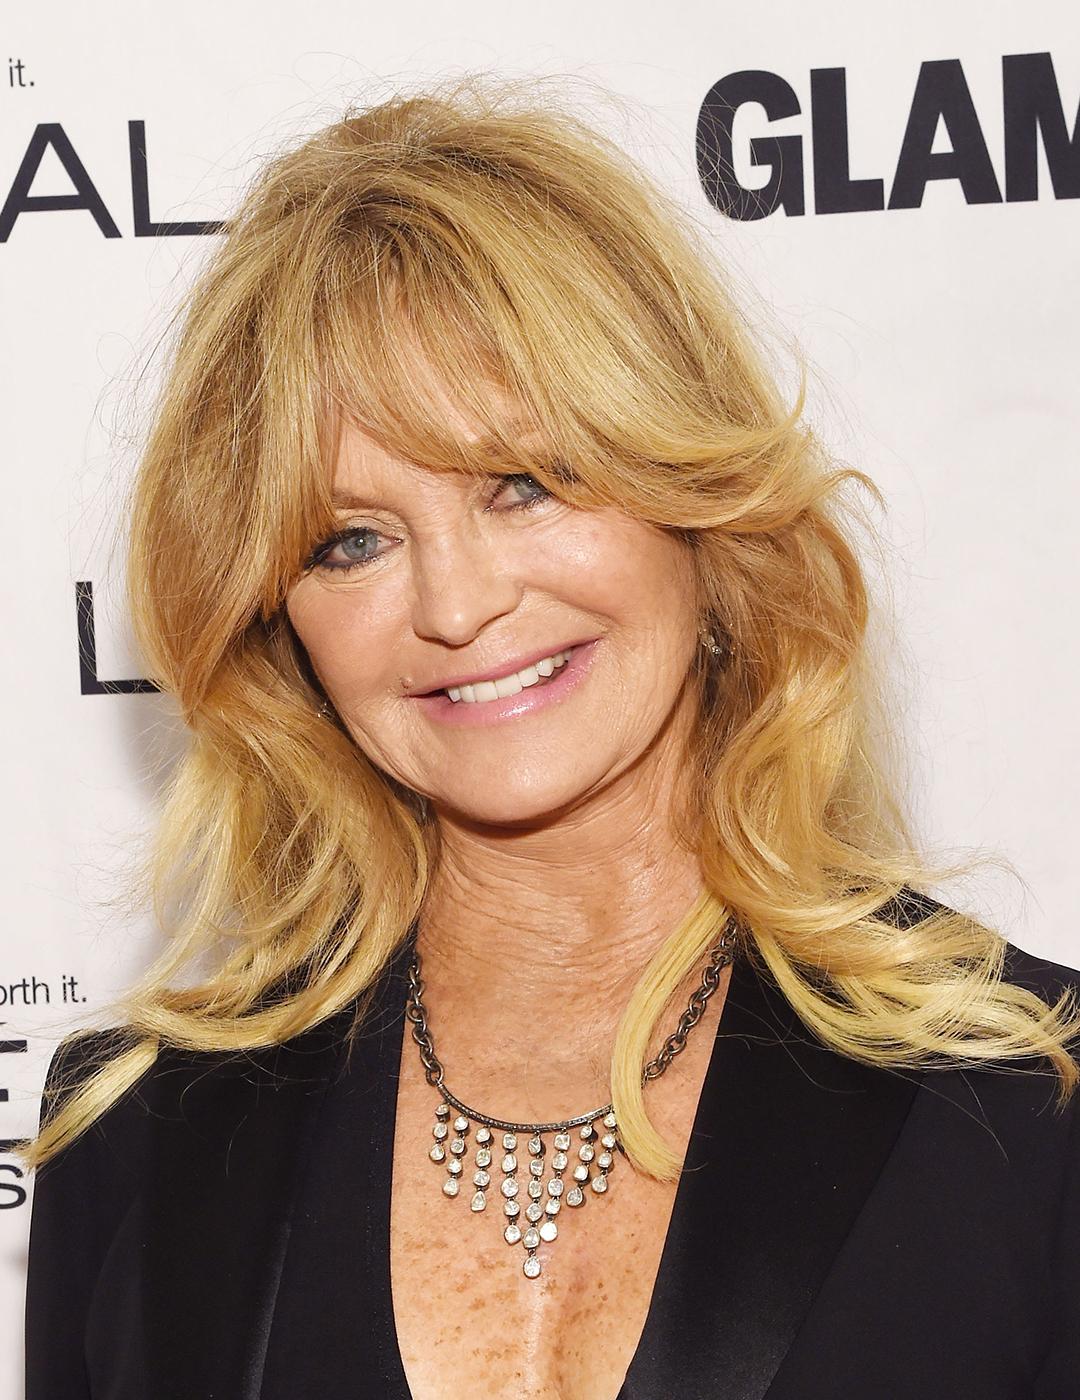 A photo of Goldie Hawn wearing a black suite and a chained necklace along with her blond ‘70s-style bangs